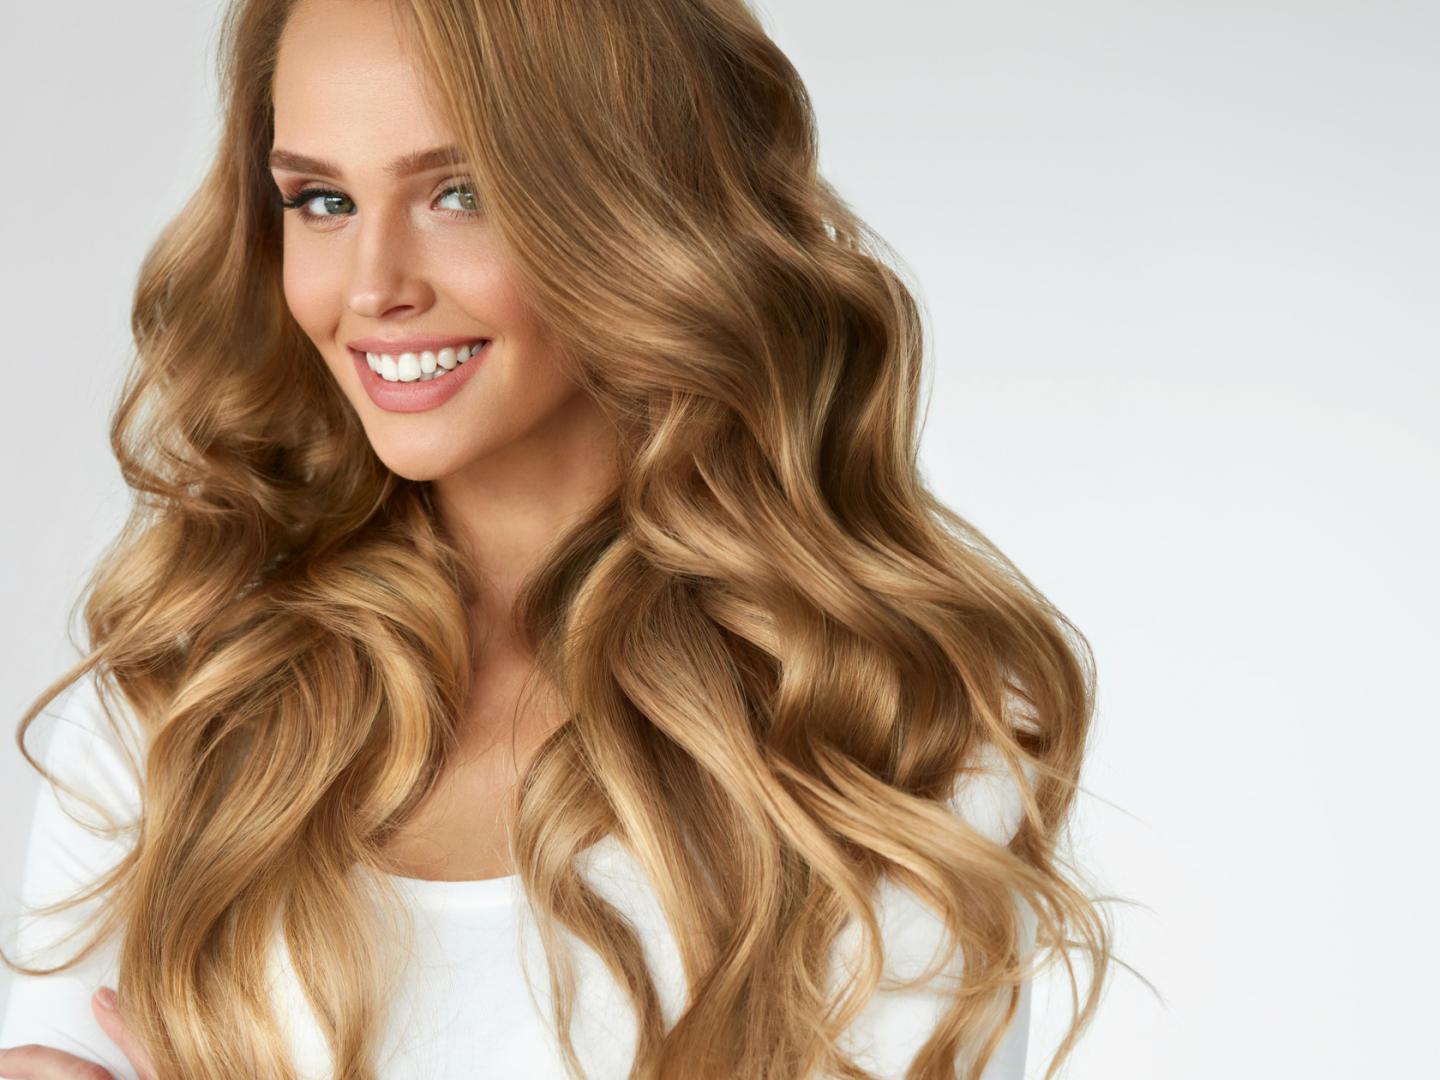 Hair Extensions 101: The Good, The Great, and Why You Need ...